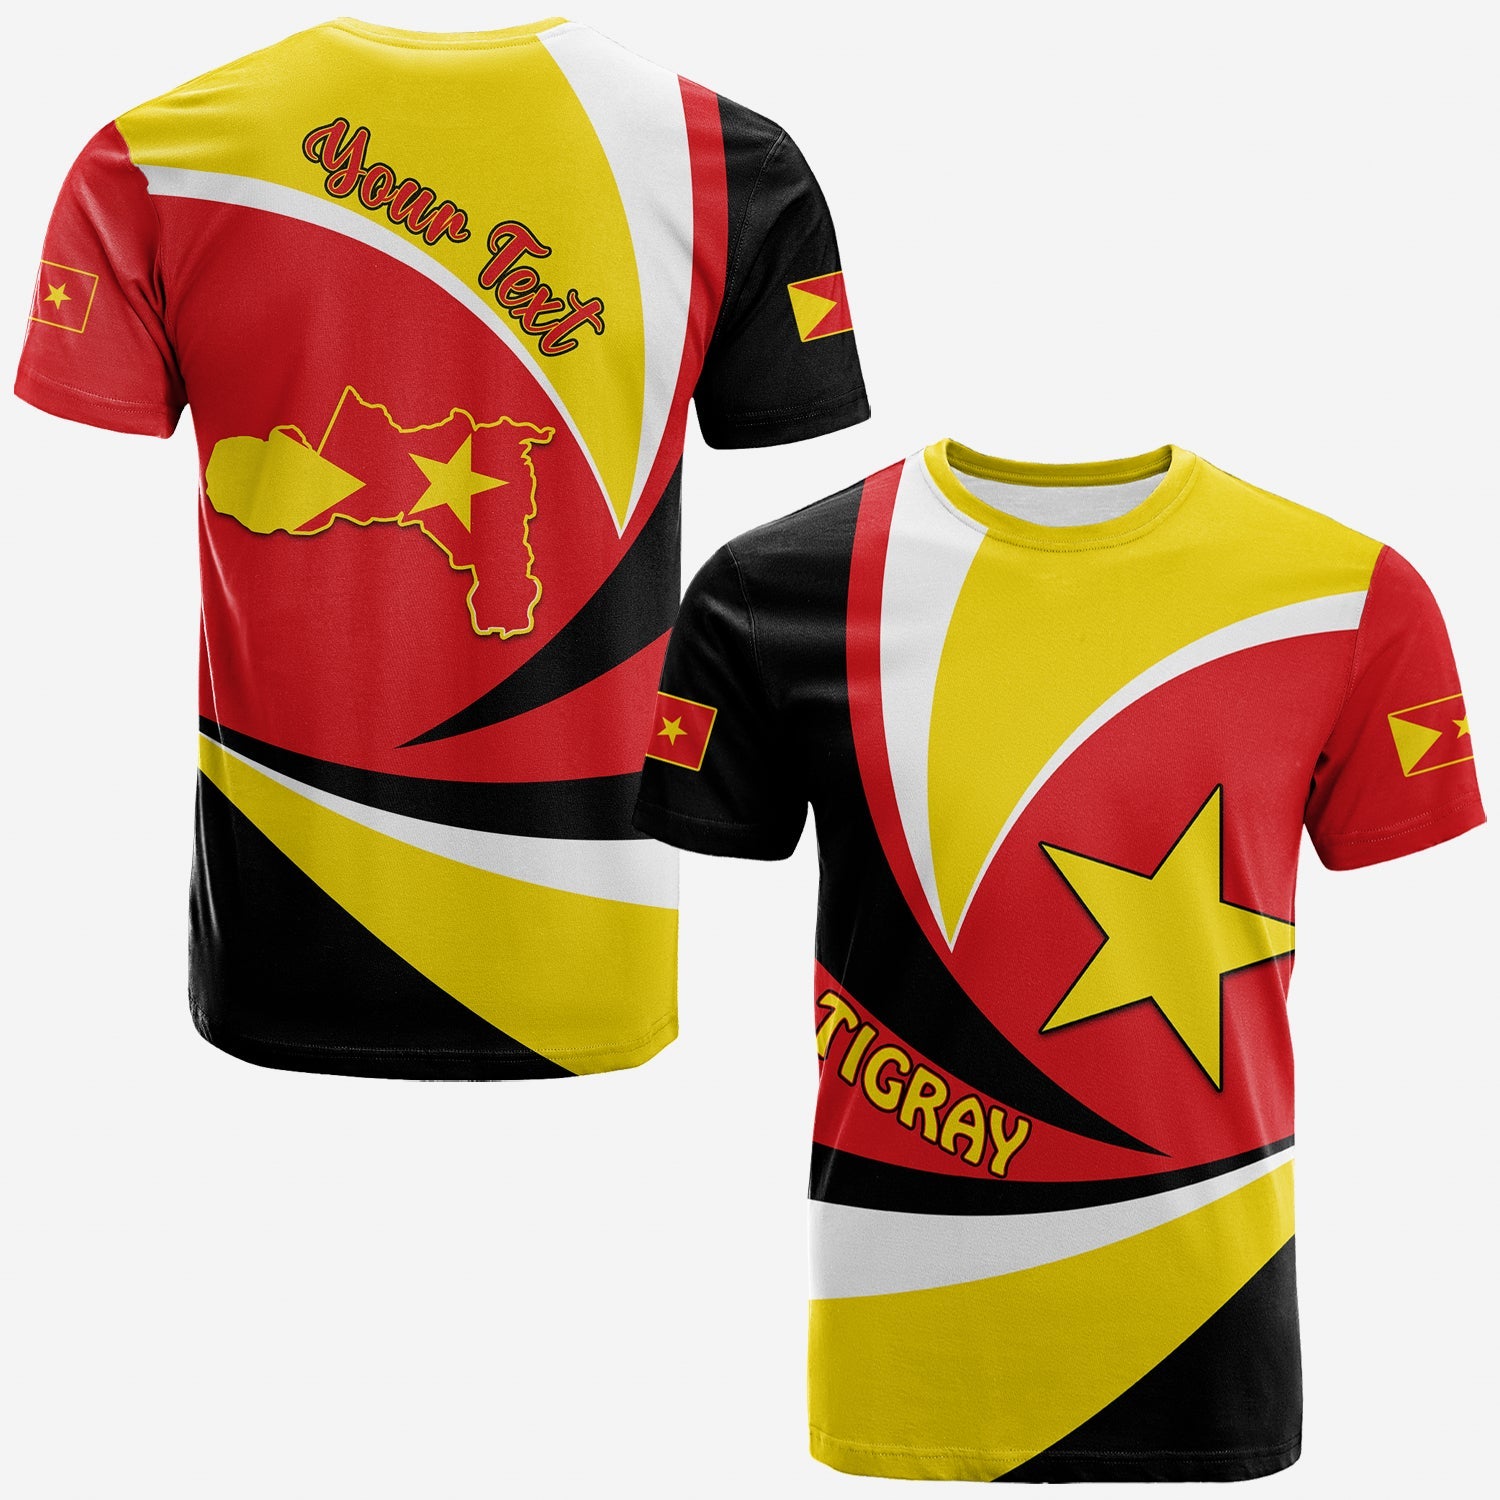 custom-personalised-tigray-t-shirt-style-color-flag